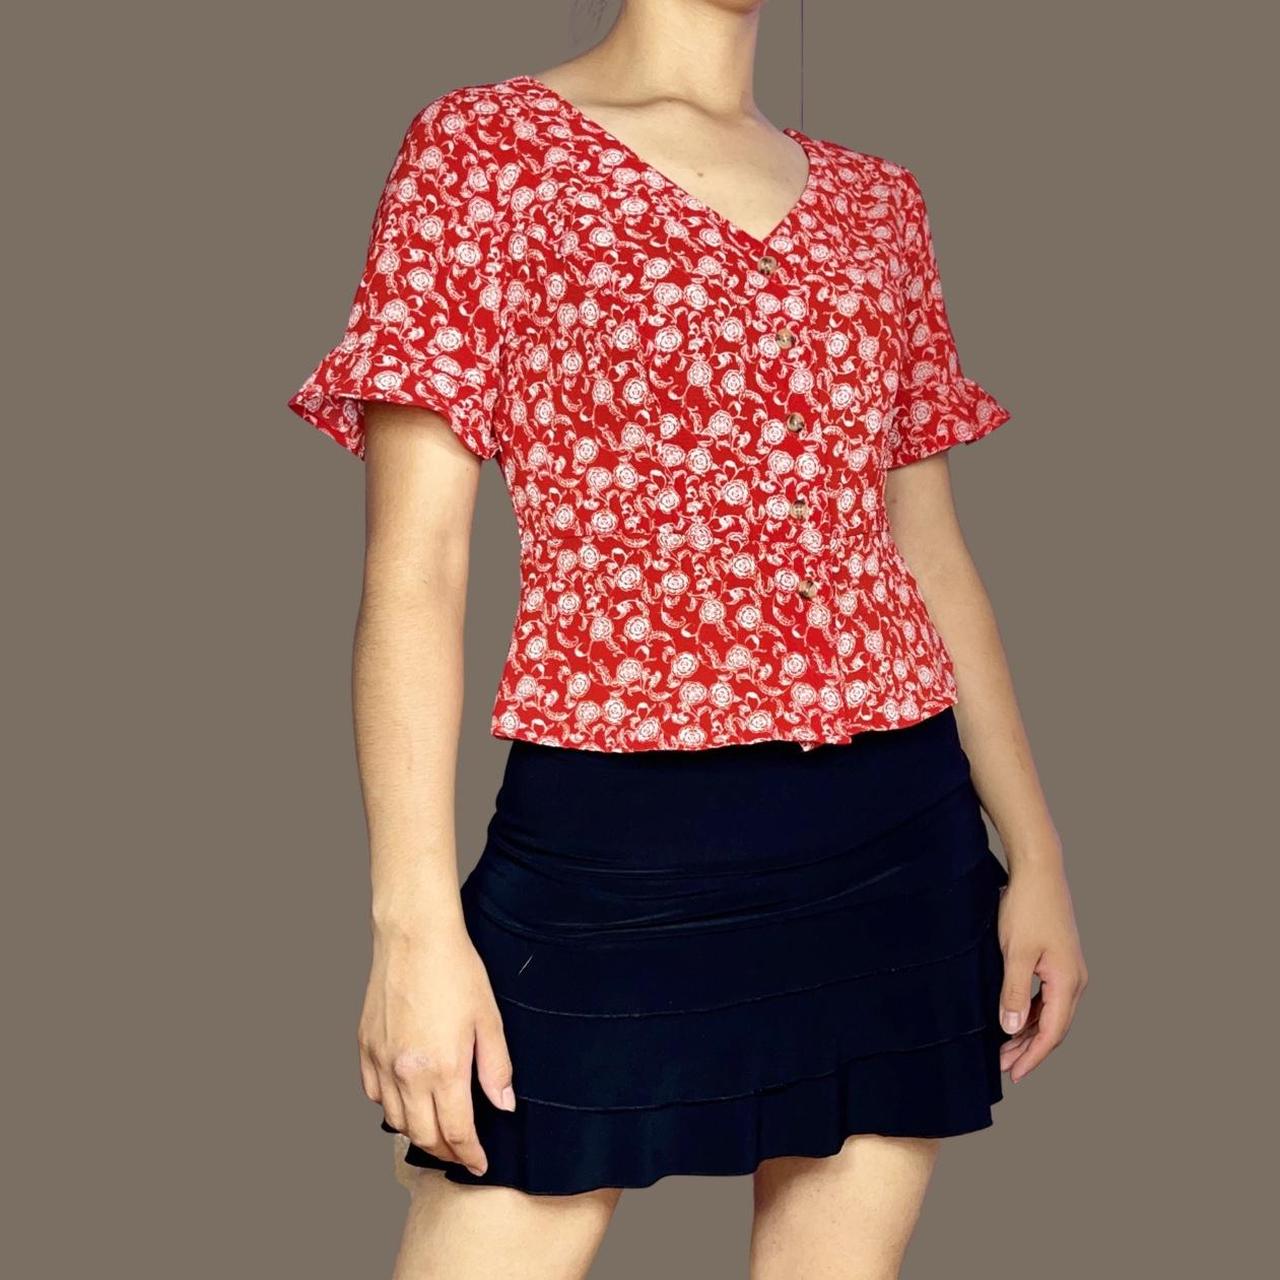 Product Image 1 - Red baby doll floral top.